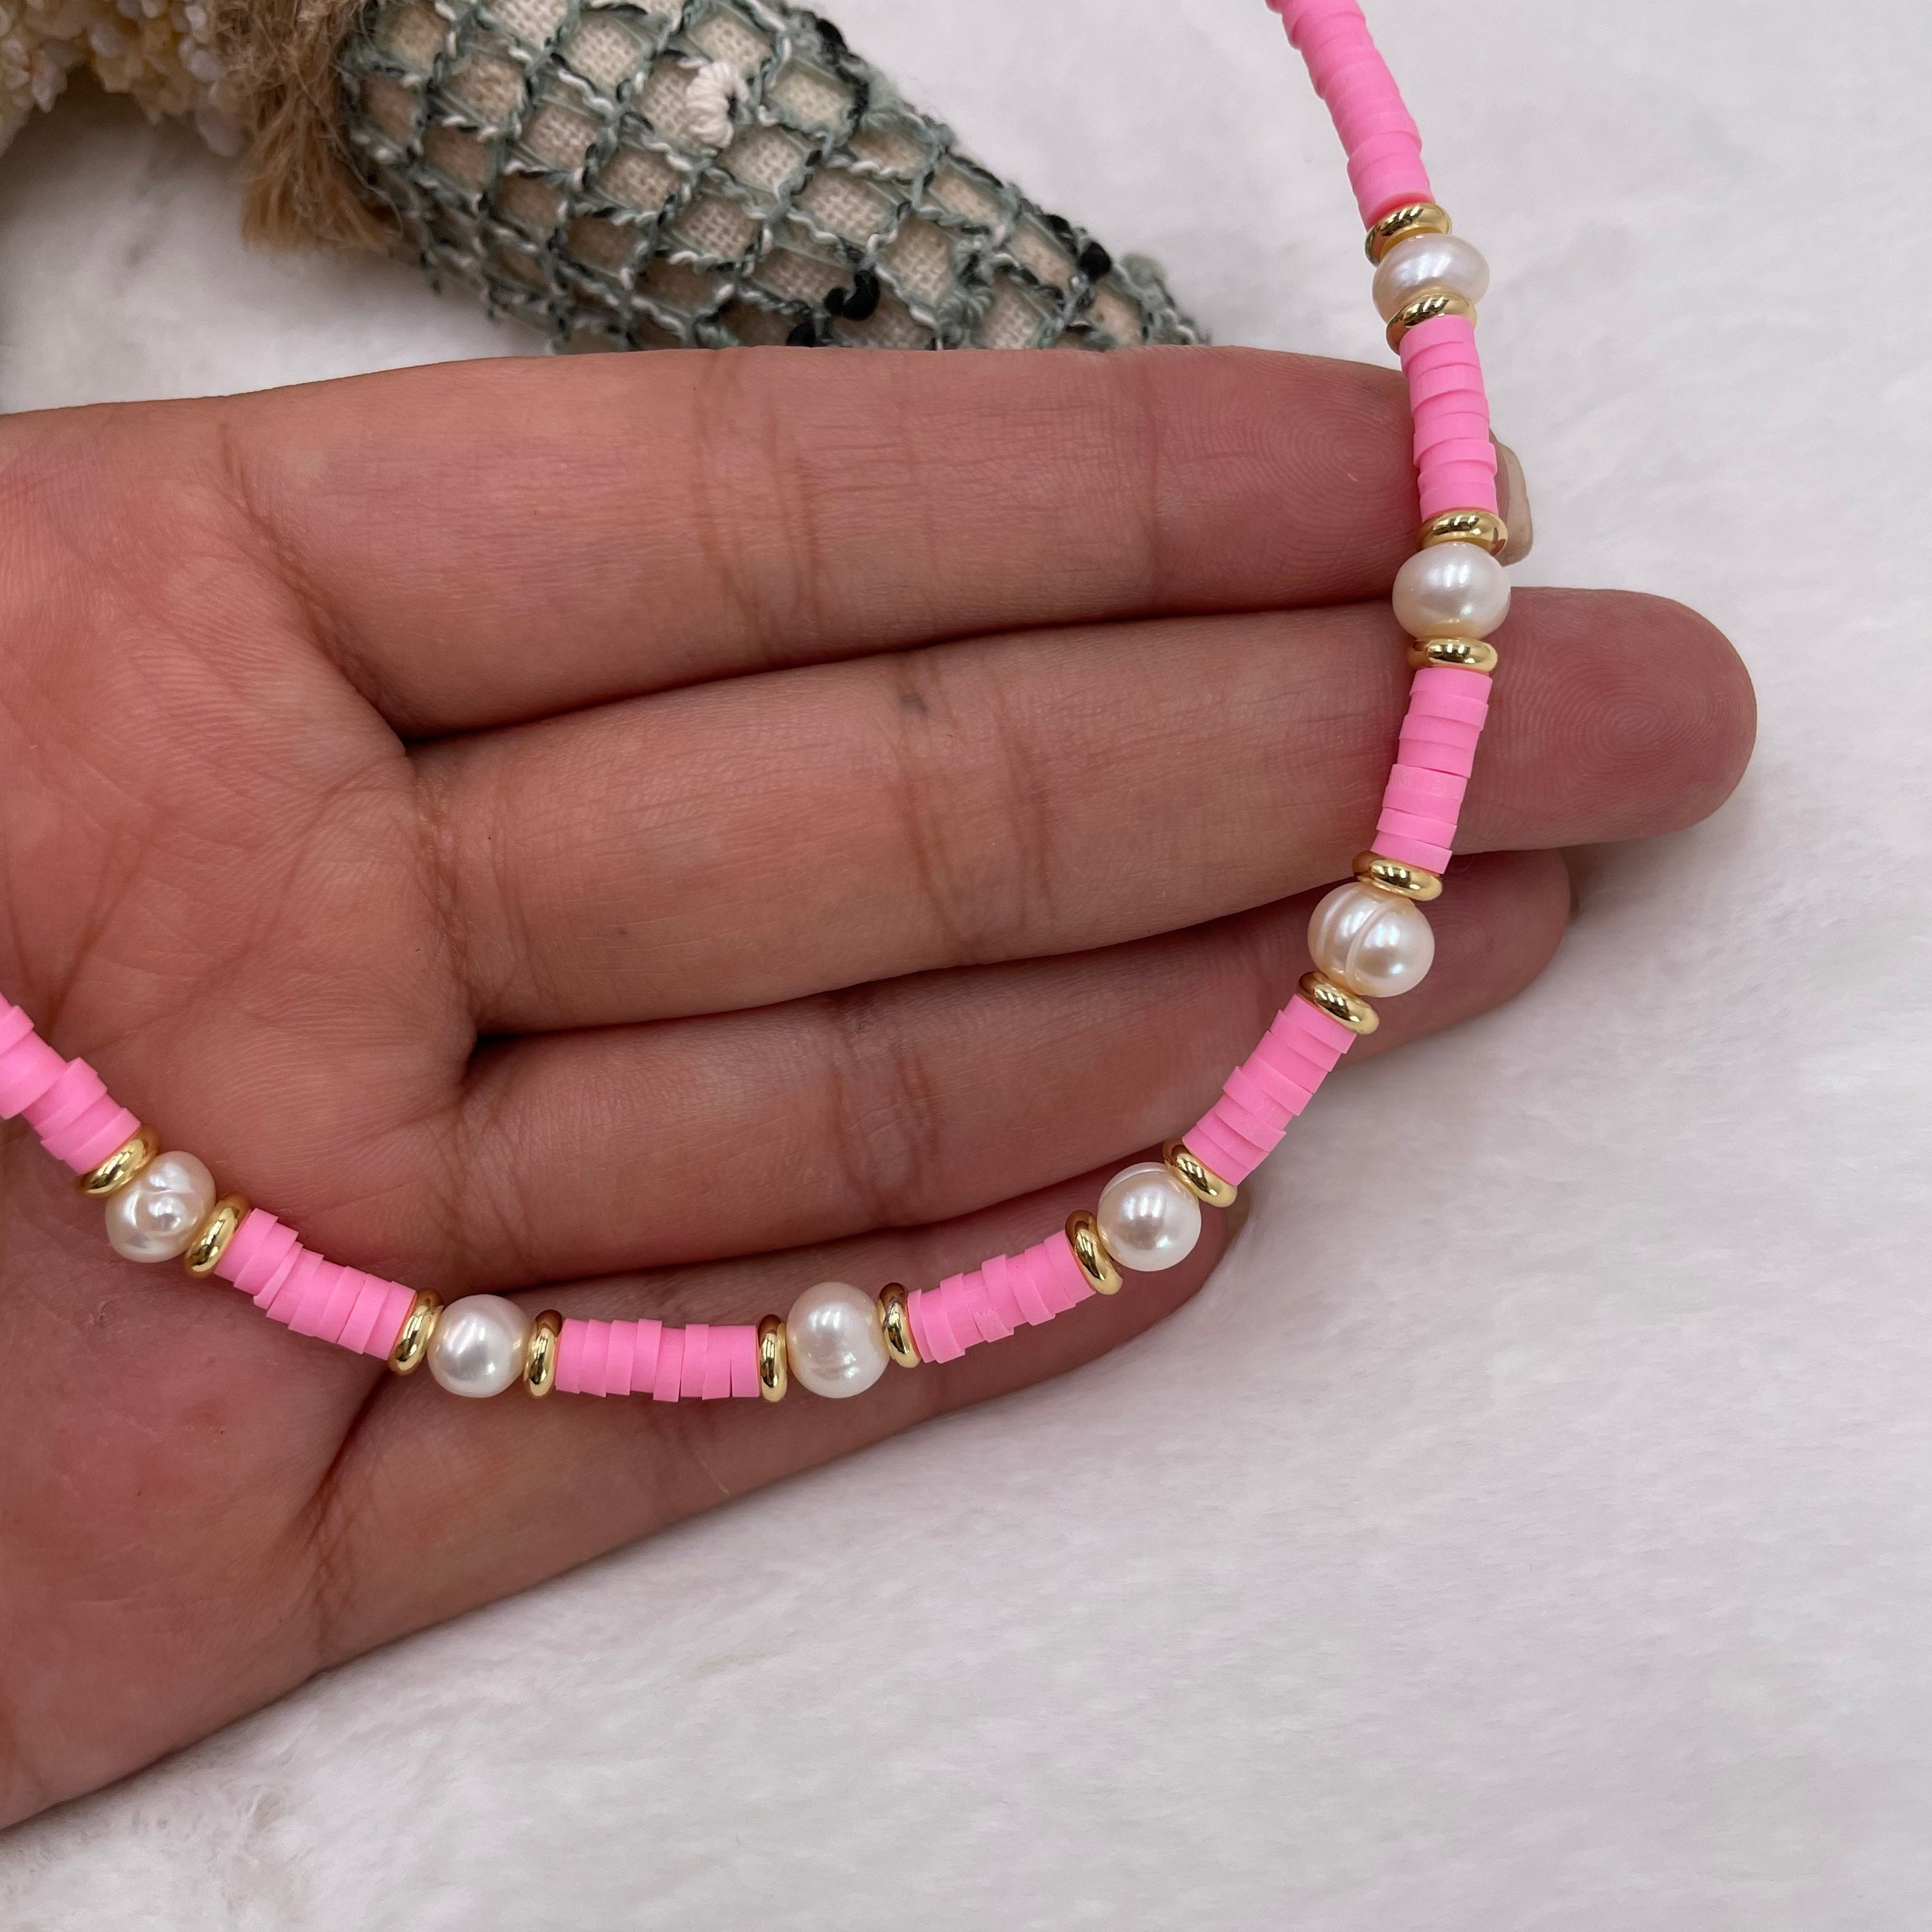 Heishi bead necklace women, vinyl heishi beads, Pink statement necklace,  Polymer Clay Necklace, choker for women, Polymer Bead Necklace